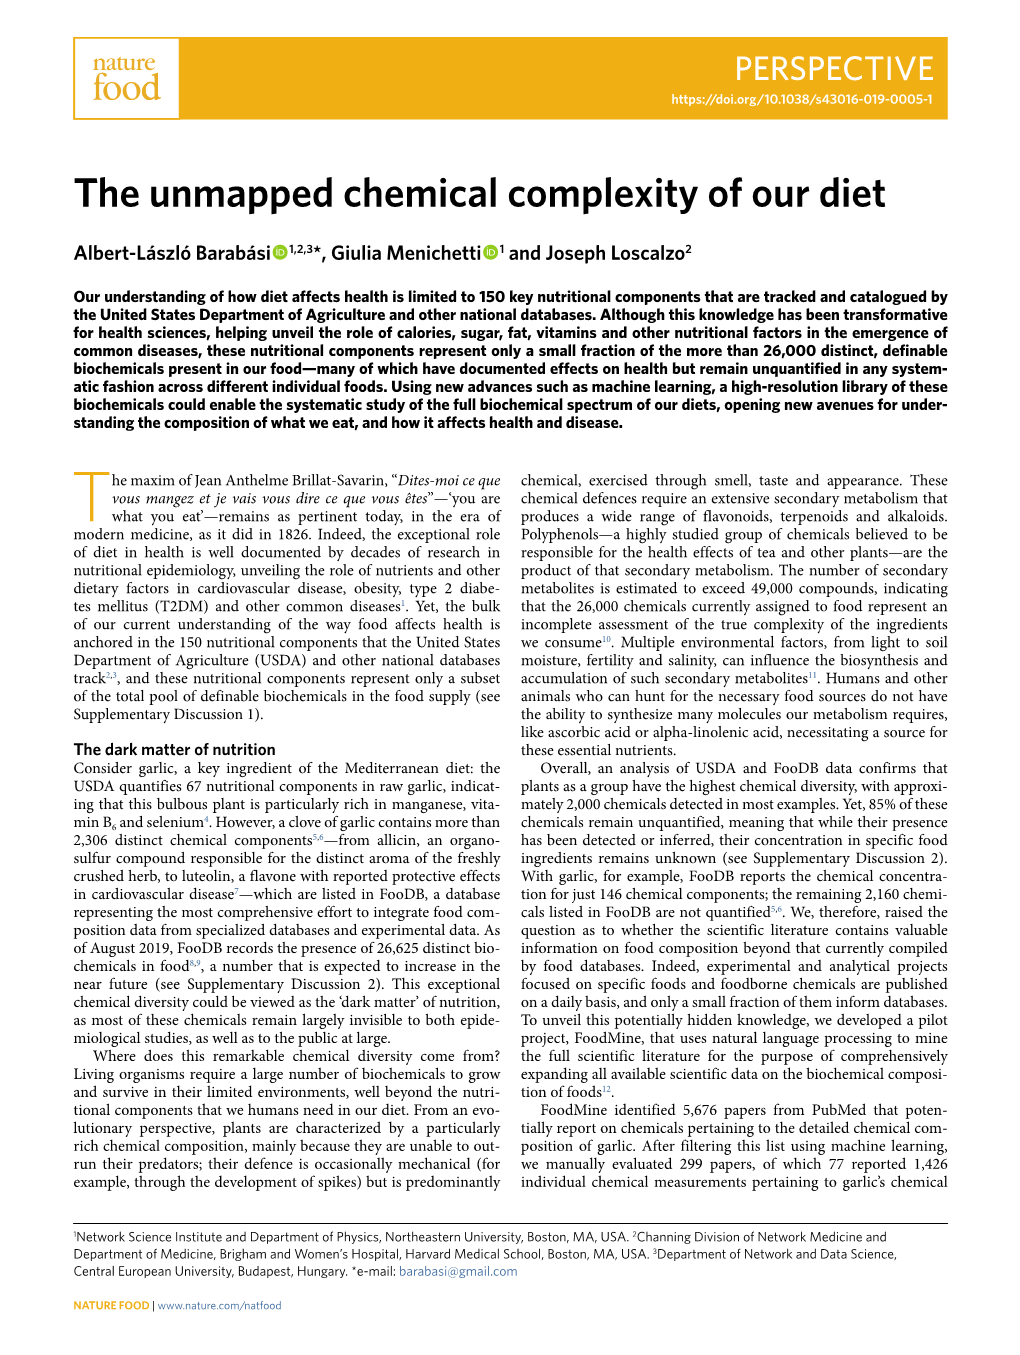 The Unmapped Chemical Complexity of Our Diet